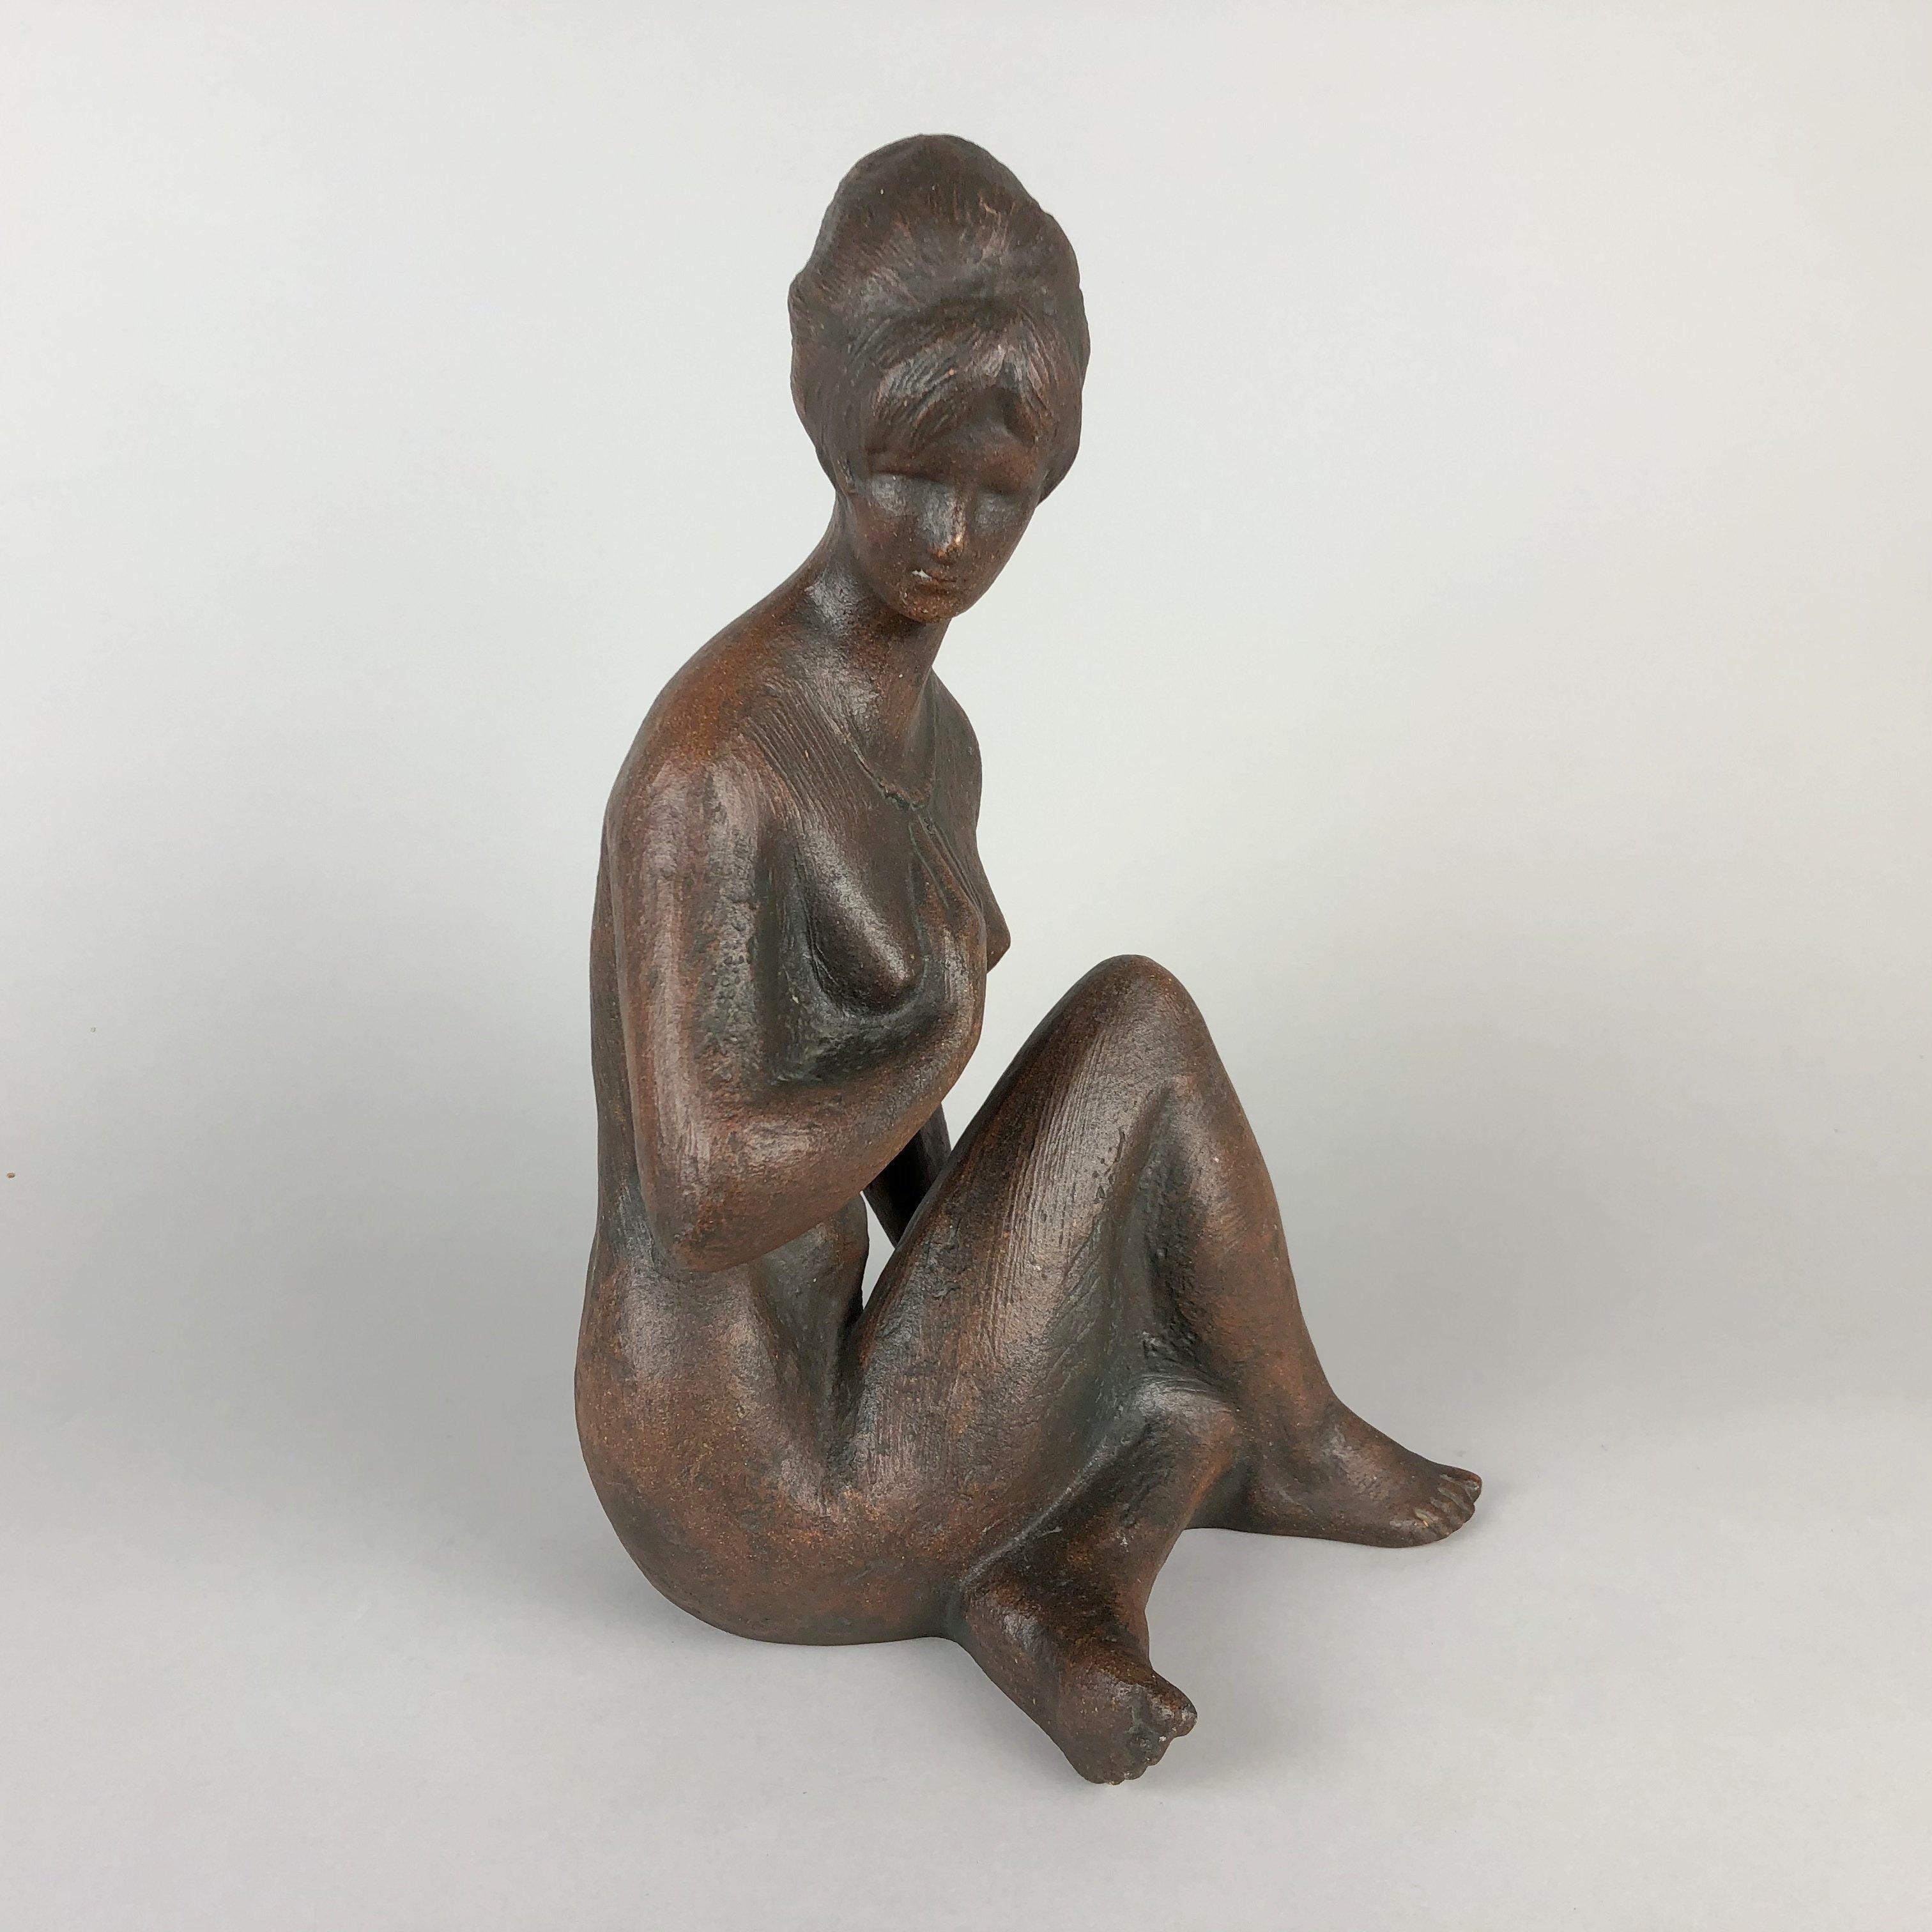 Beautiful patinated ceramic statue designed by Bohumil Kokrda in 1967 and produced by Jihokera Bechyne in former Czechoslovakia. The statue of a nude sitting women is in good vintage condition.